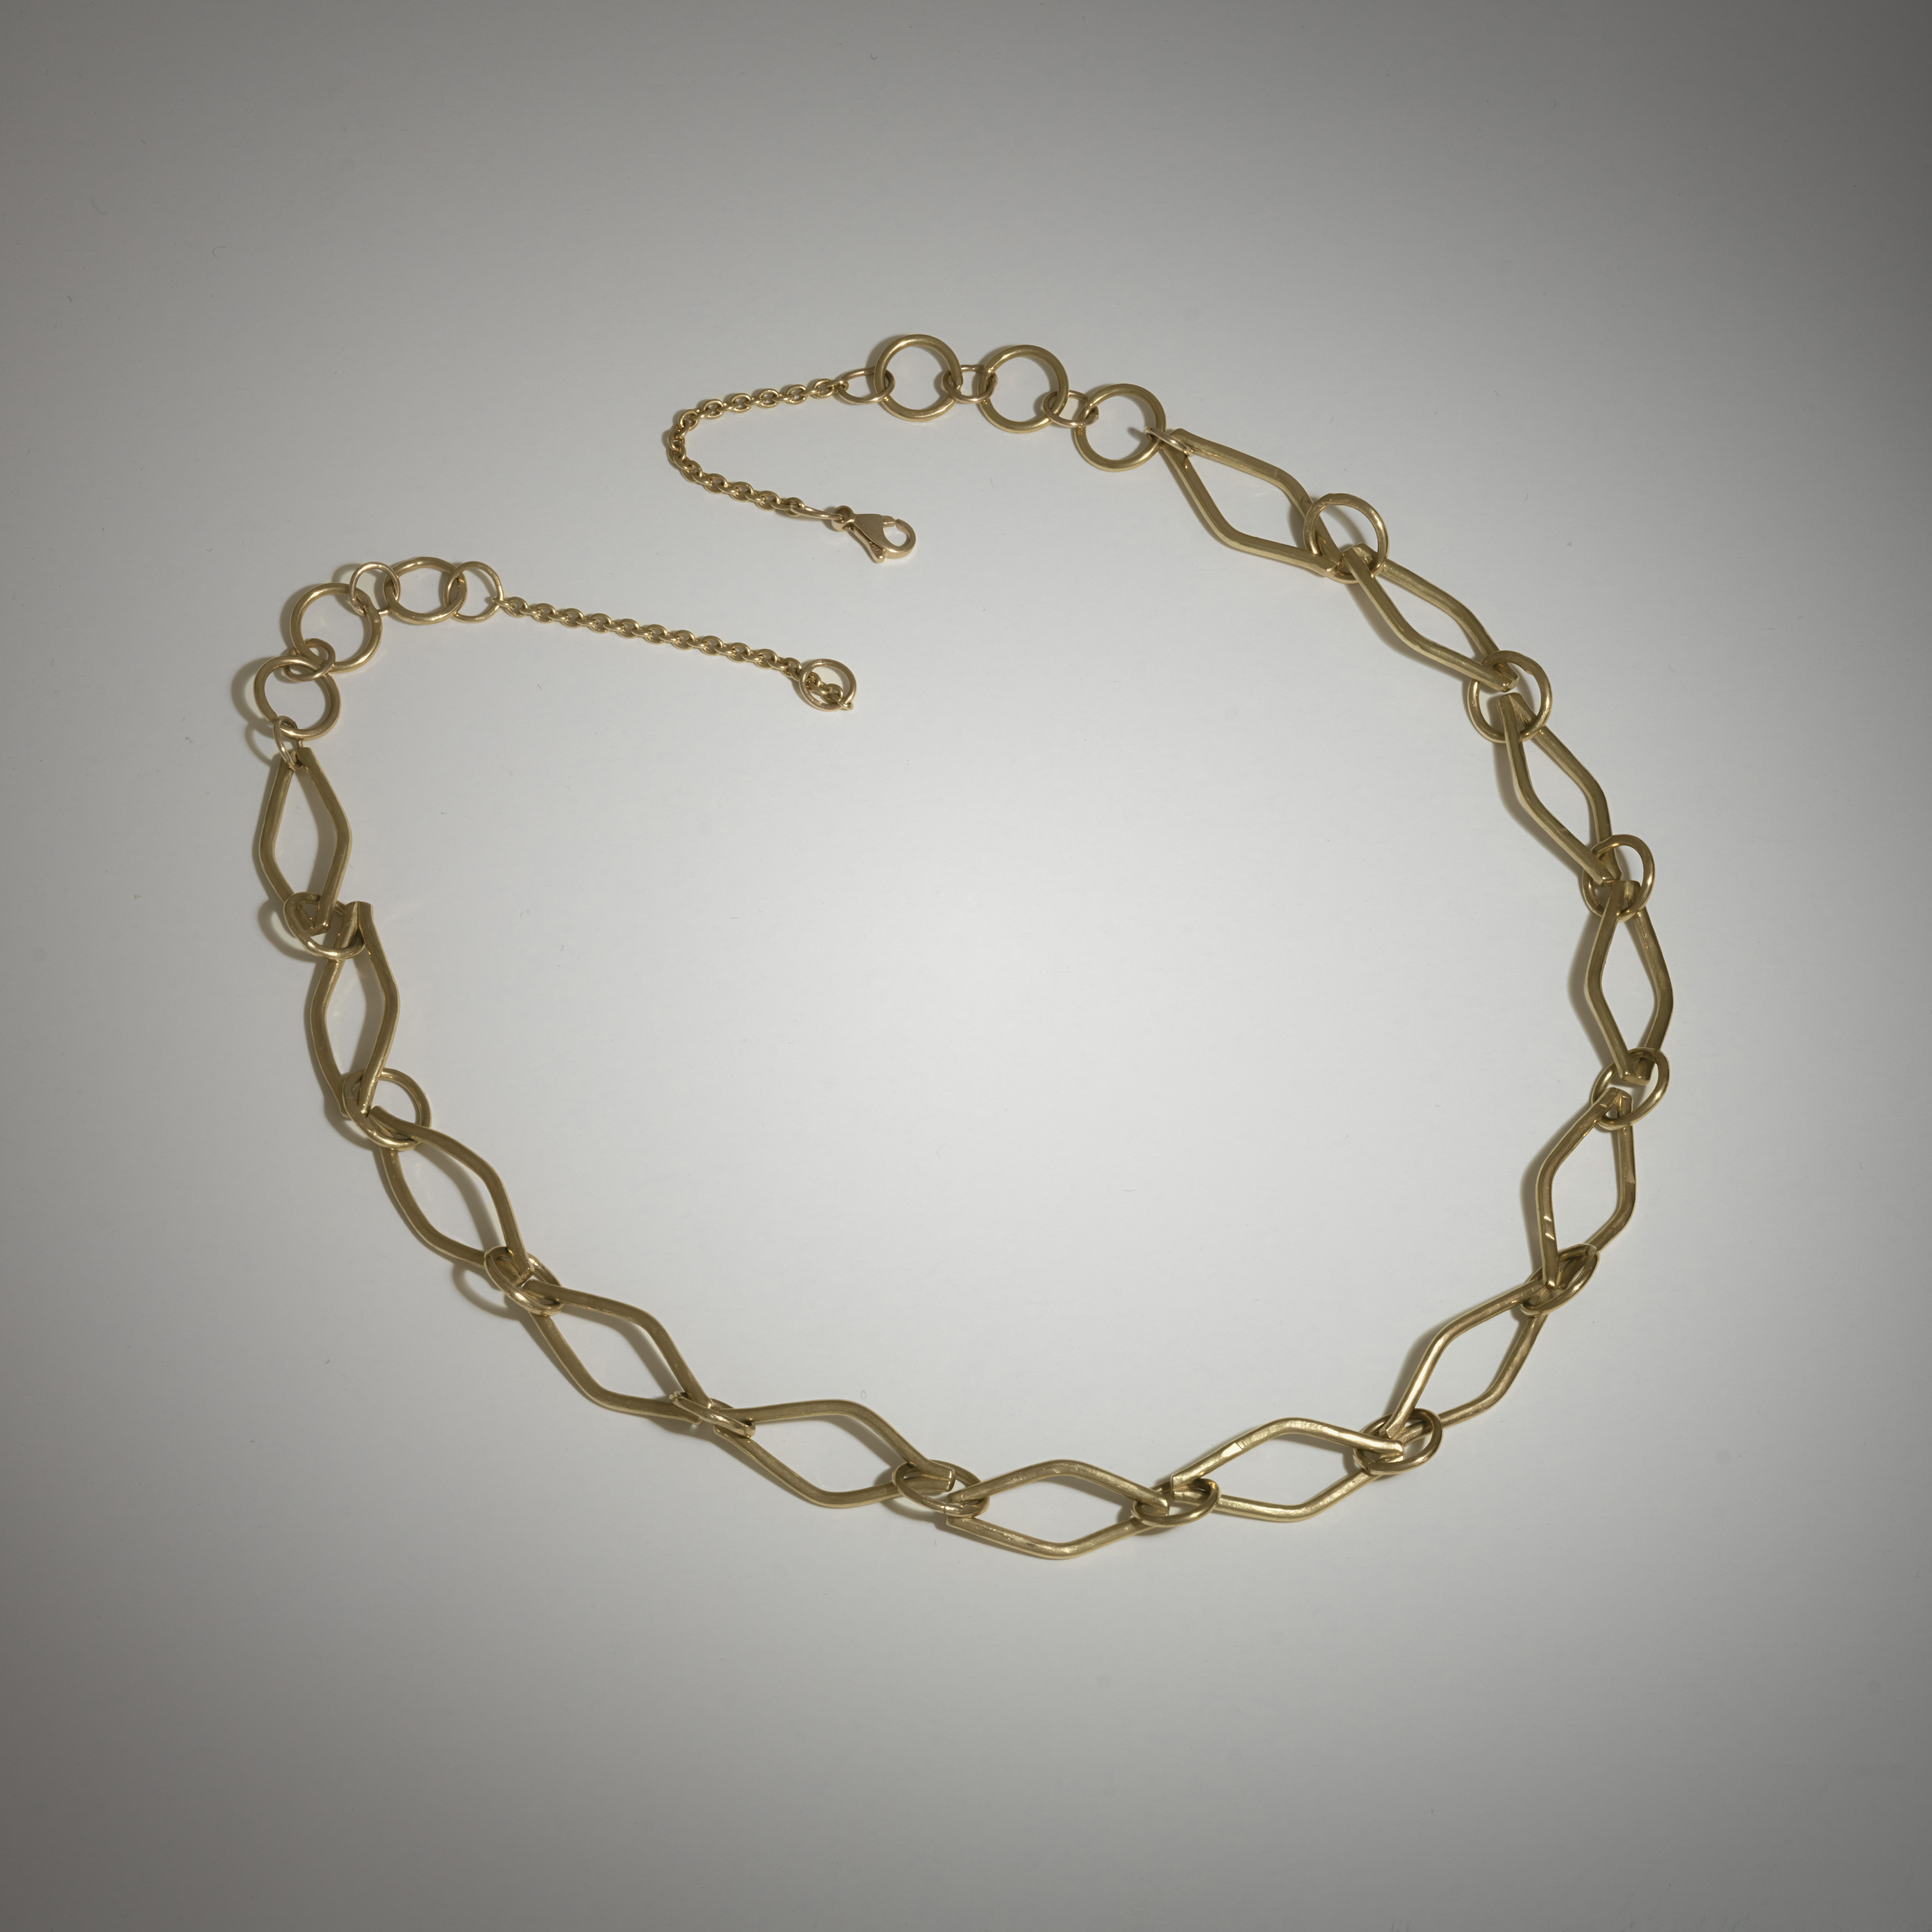 Agave link neck chain 18k